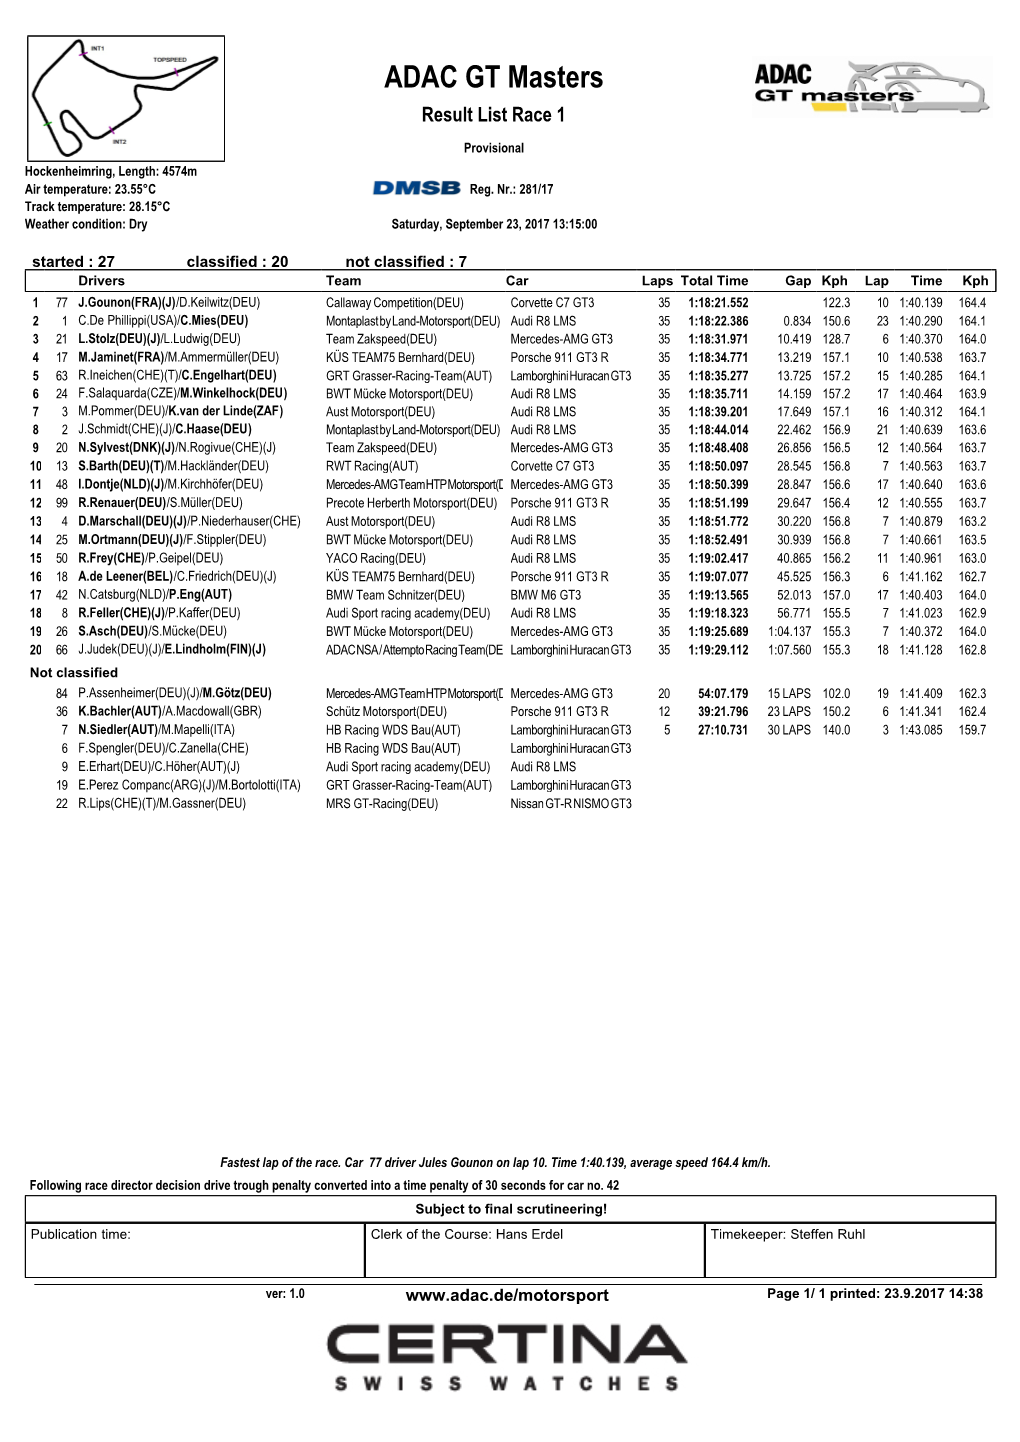 ADAC GT Masters Result List Race 1